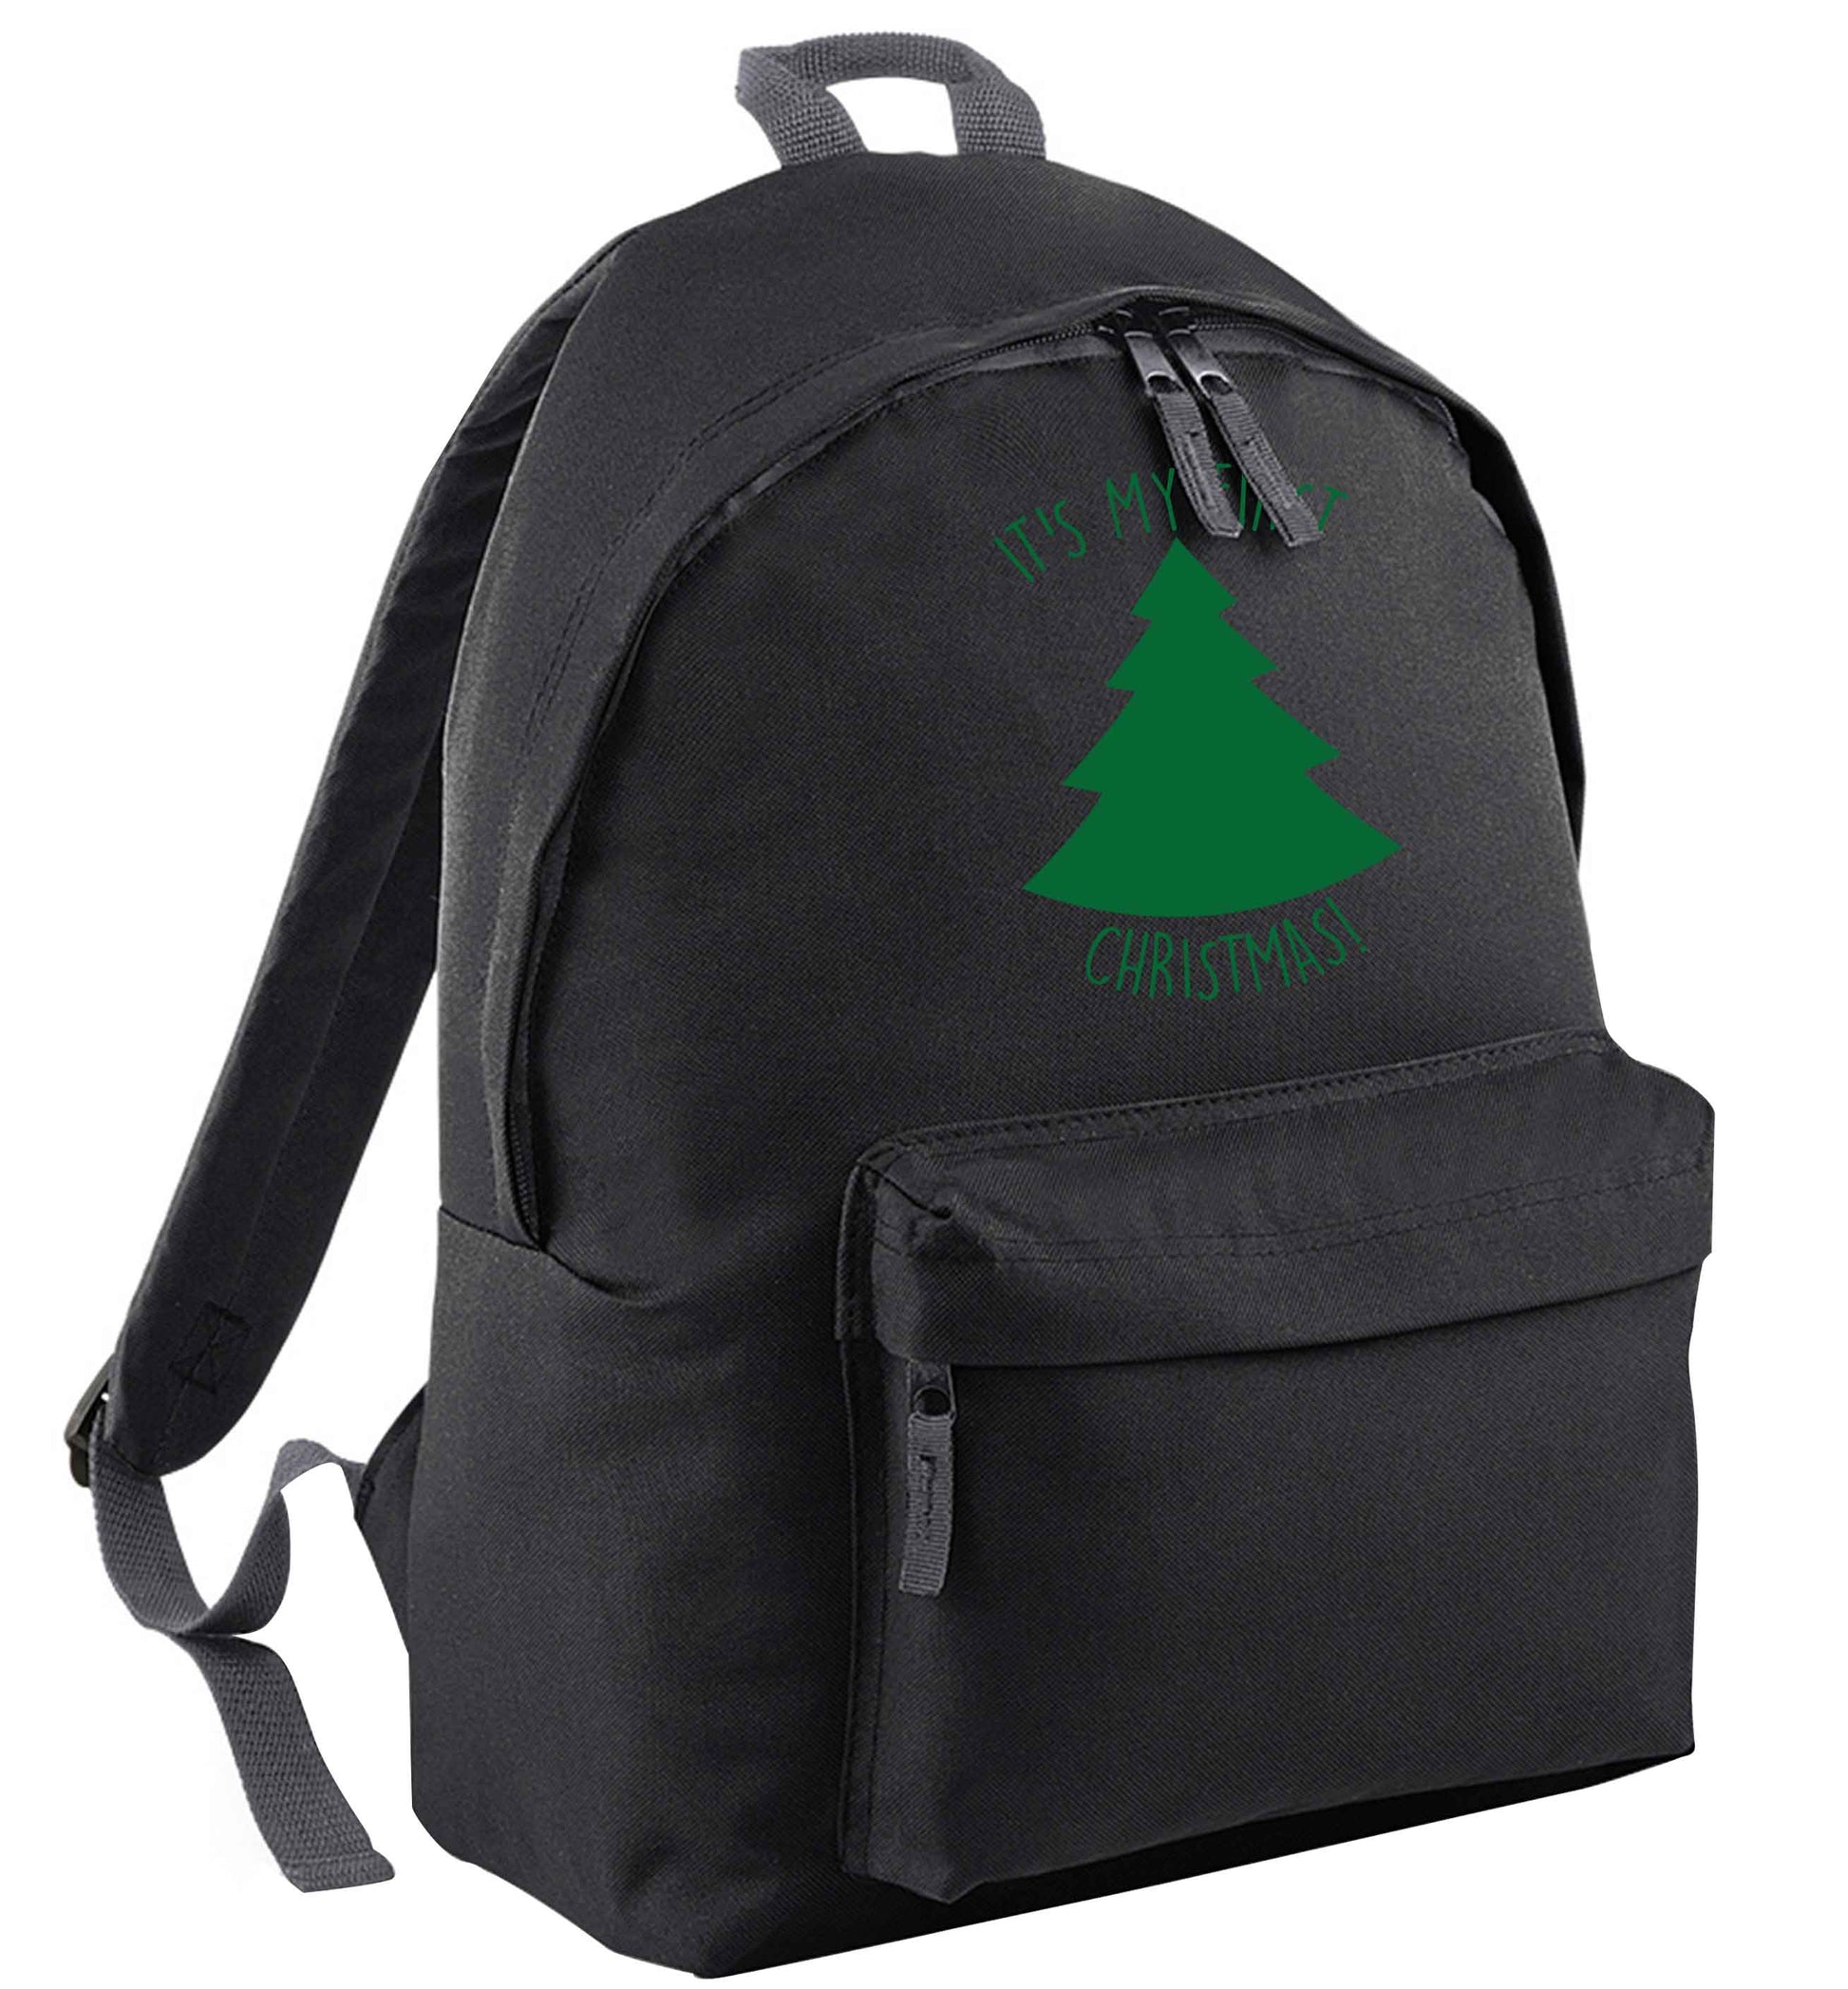 It's my first Christmas - tree black adults backpack